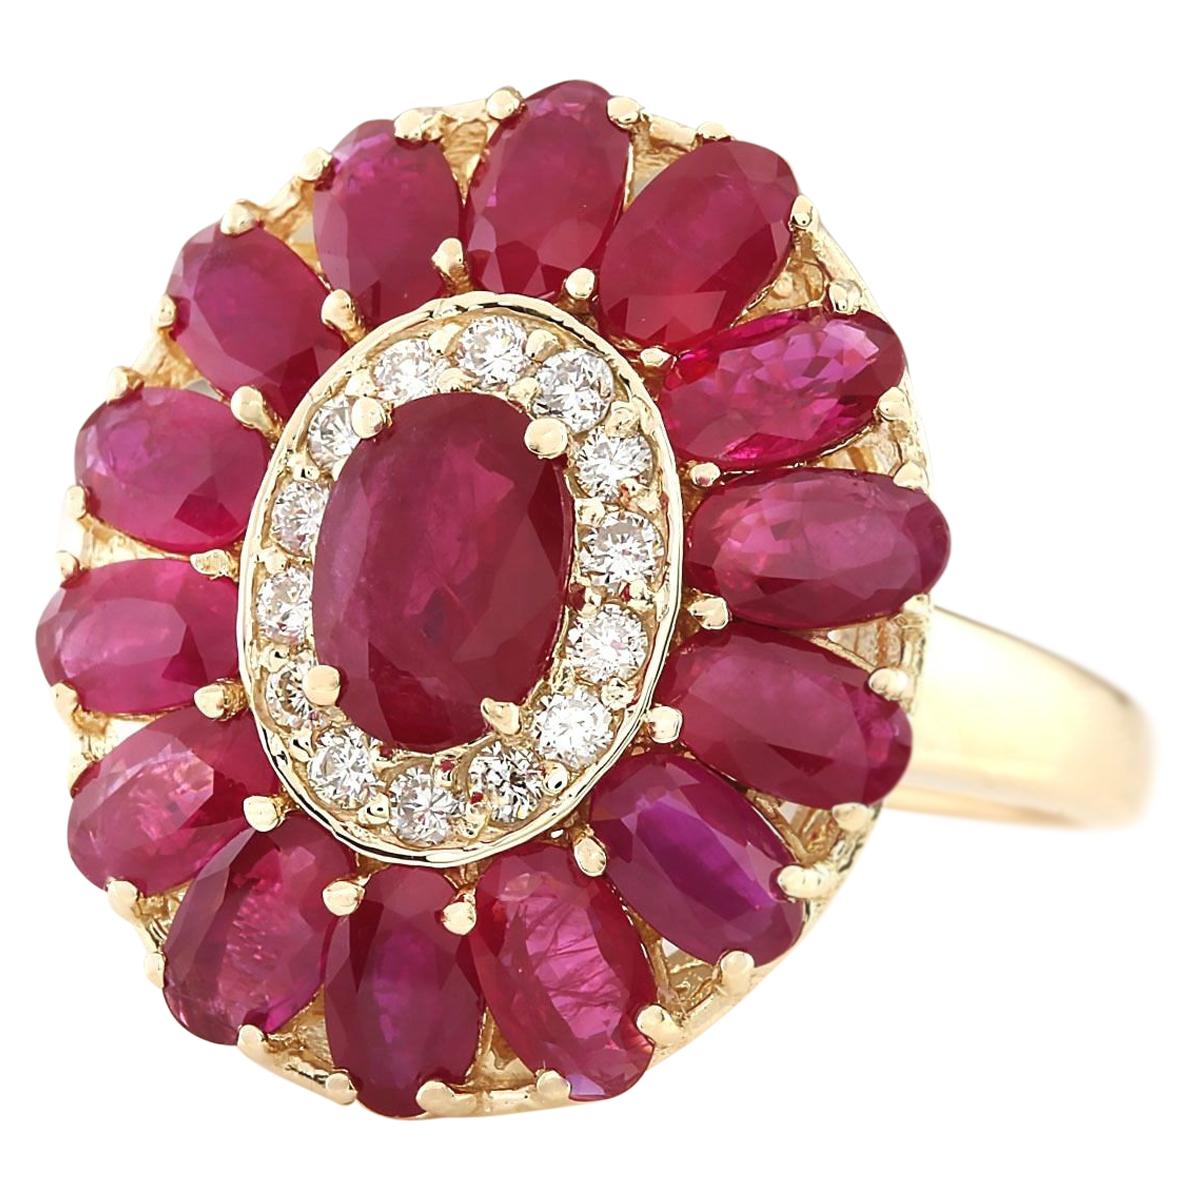 Stamped: 14K Yellow Gold
Total Ring Weight: 6.3 Grams
Total Natural Ruby Weight is 4.07 Carat
Color: Red
Total Natural Diamond Weight is 0.35 Carat
Color: F-G, Clarity: VS2-SI1
Face Measures: 20.30x17.80 mm
Sku: [703880W]